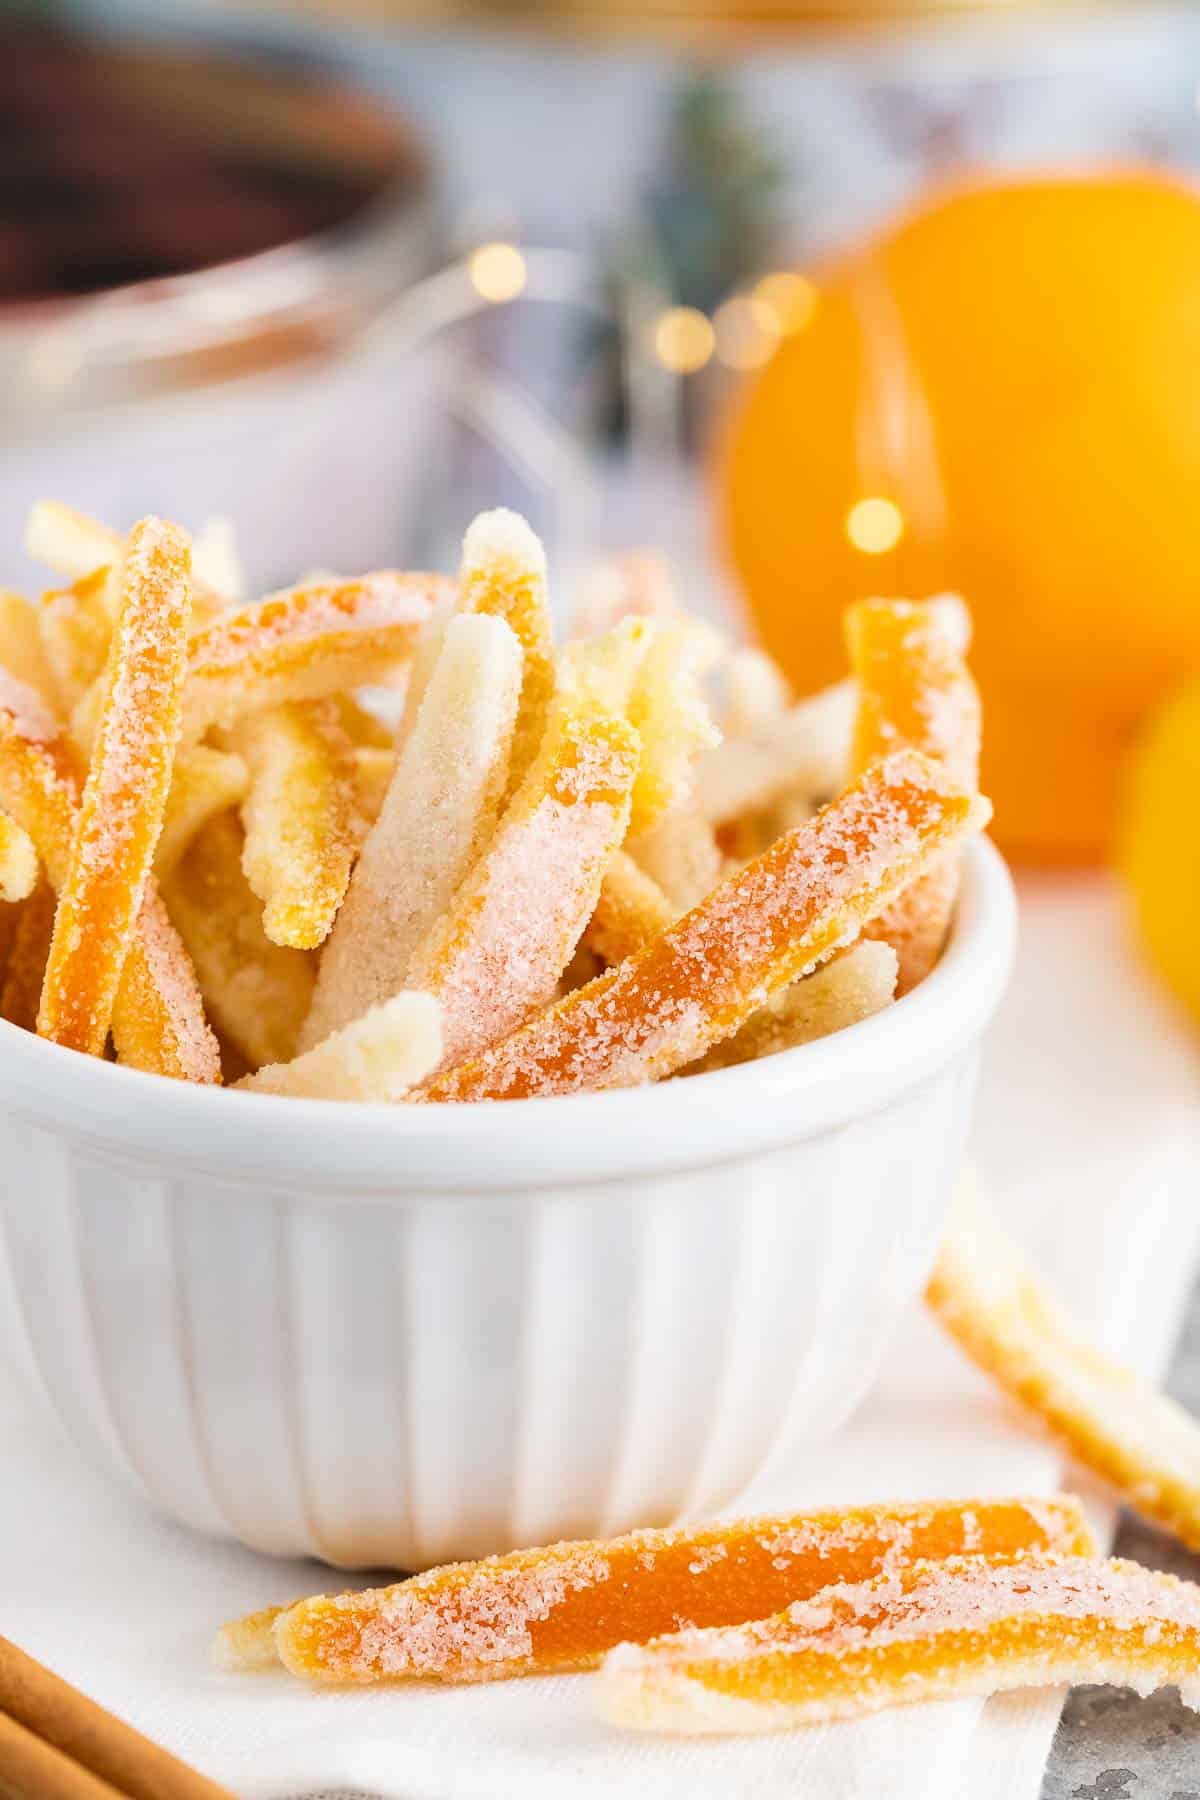 Candied peel in a small white bowl with oranges in the background.